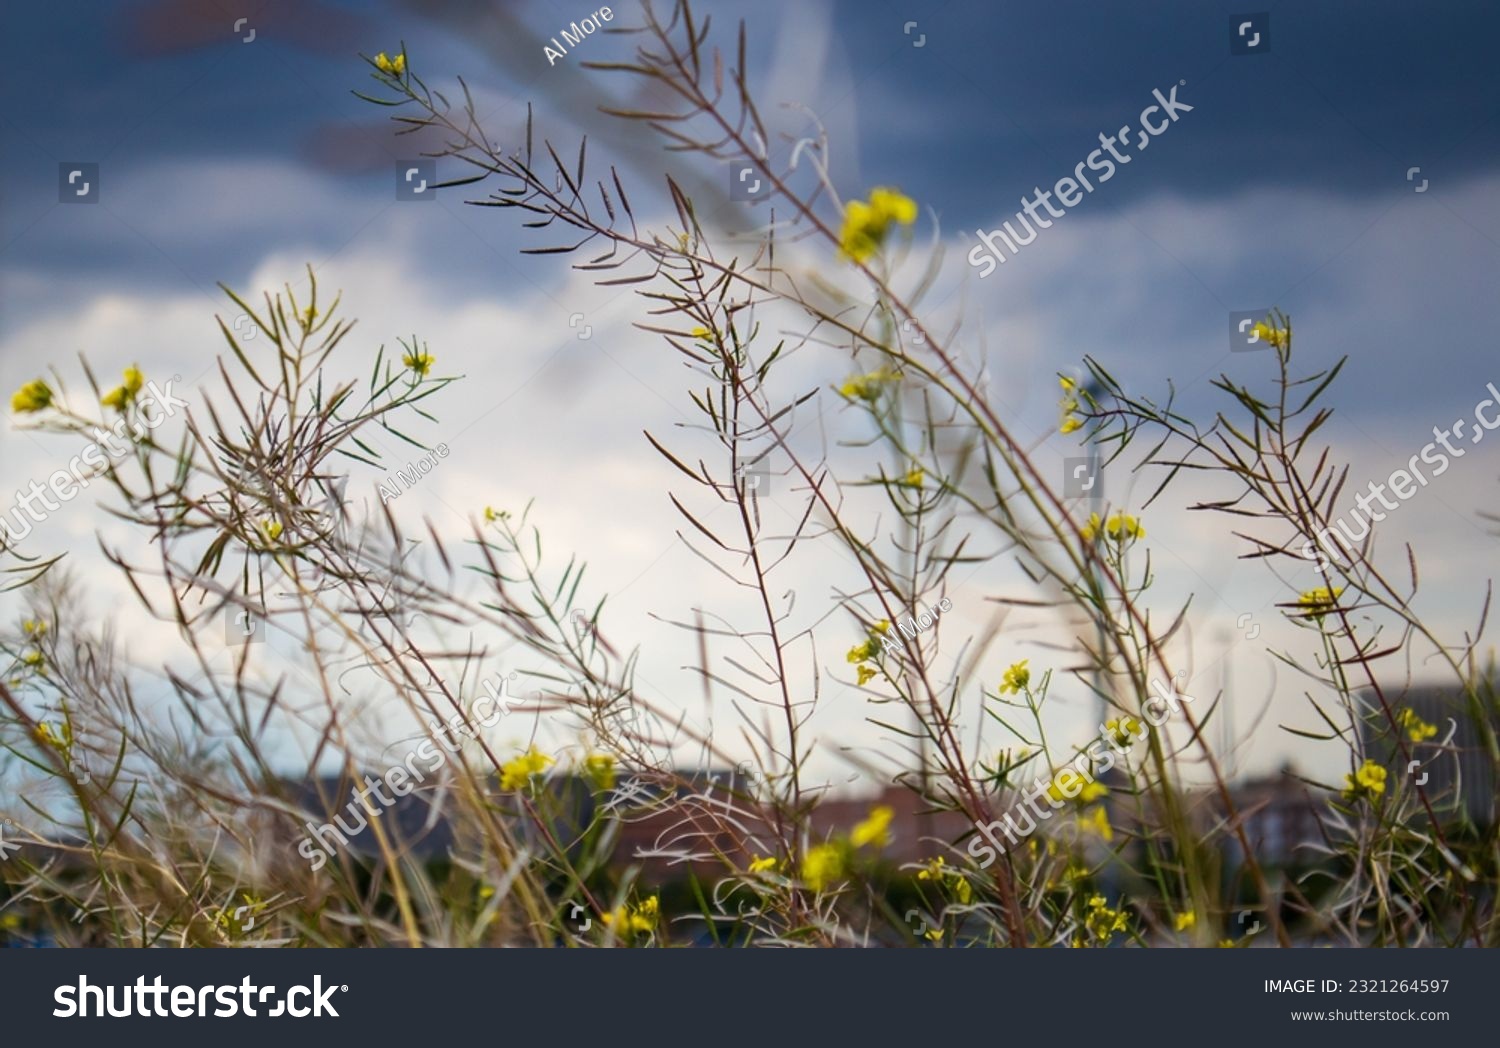 Aspalathus Linearis Rooibos Plant with tiny yellow flowers in bloom against gloomy dark blue sky low angle view. Wildflowers growing in a meadow. Leaves are used to make herbal tea rooibos.  #2321264597